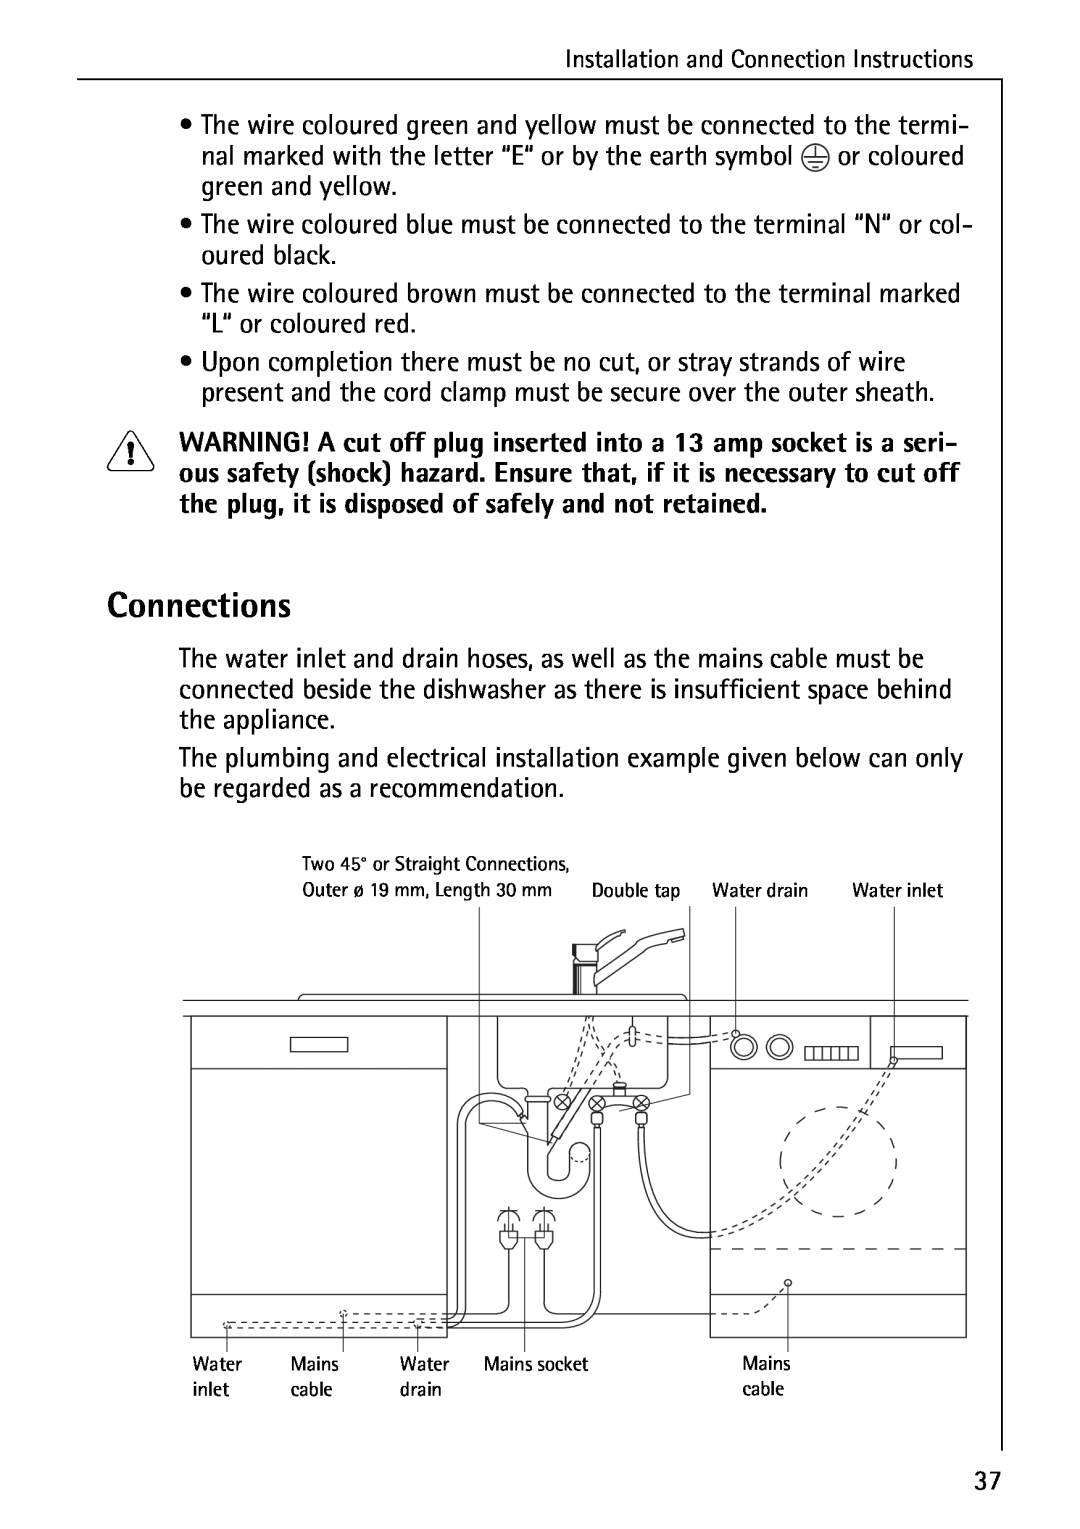 AEG 3A manual Connections 